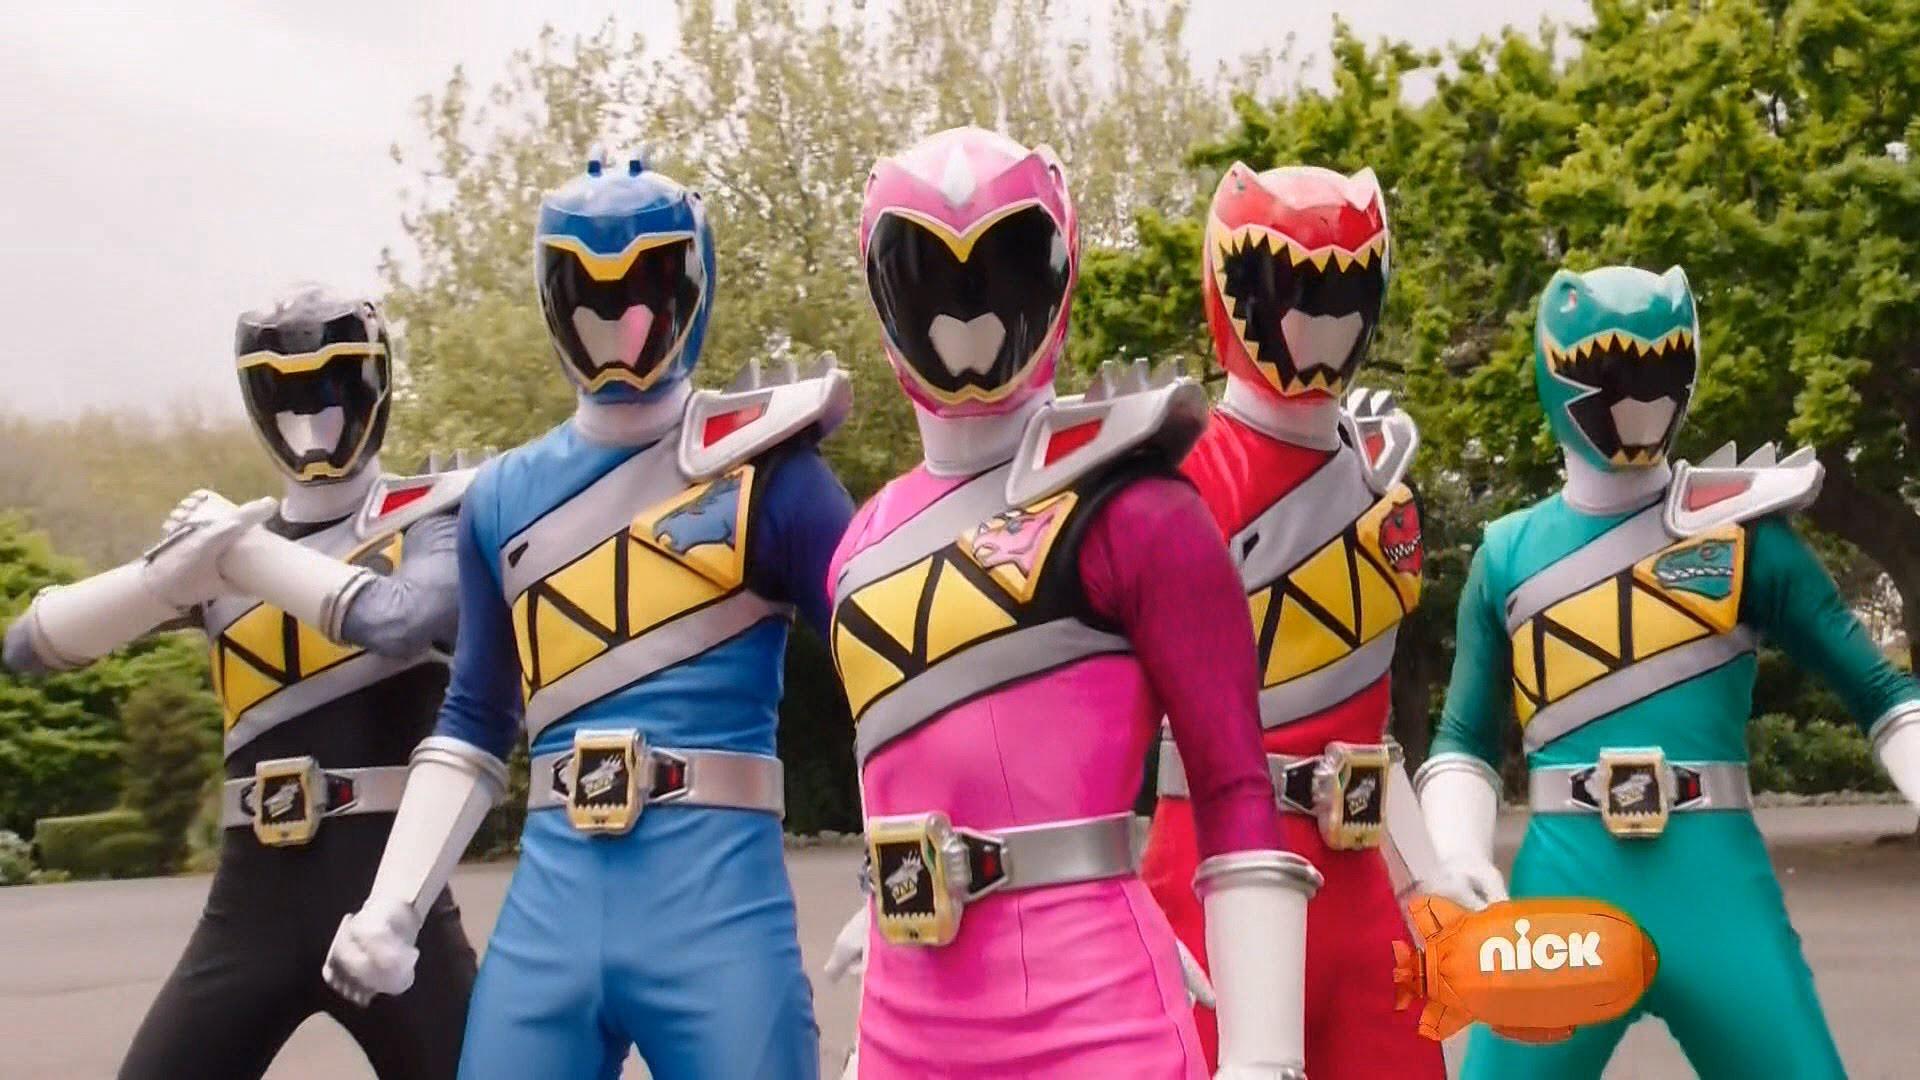 Power Rangers Dino Charge Wallpapers - Wallpaper Cave